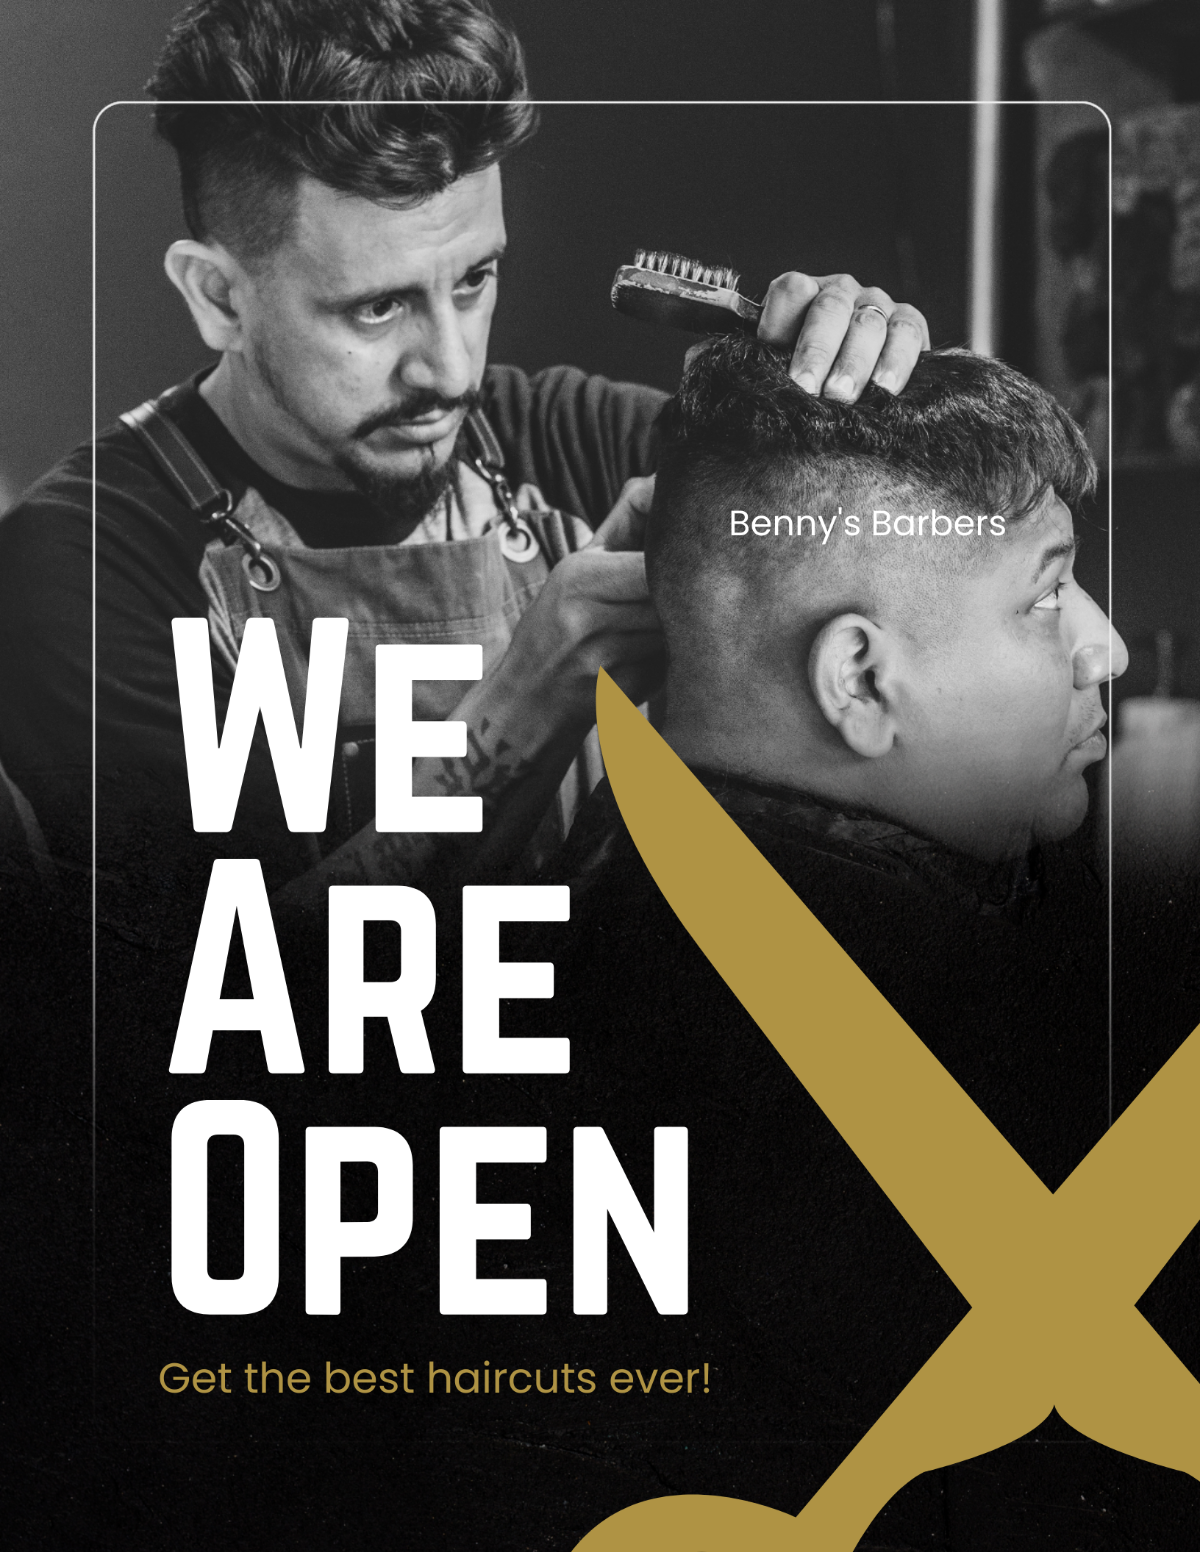 We Are Open Barber Shop Flyer